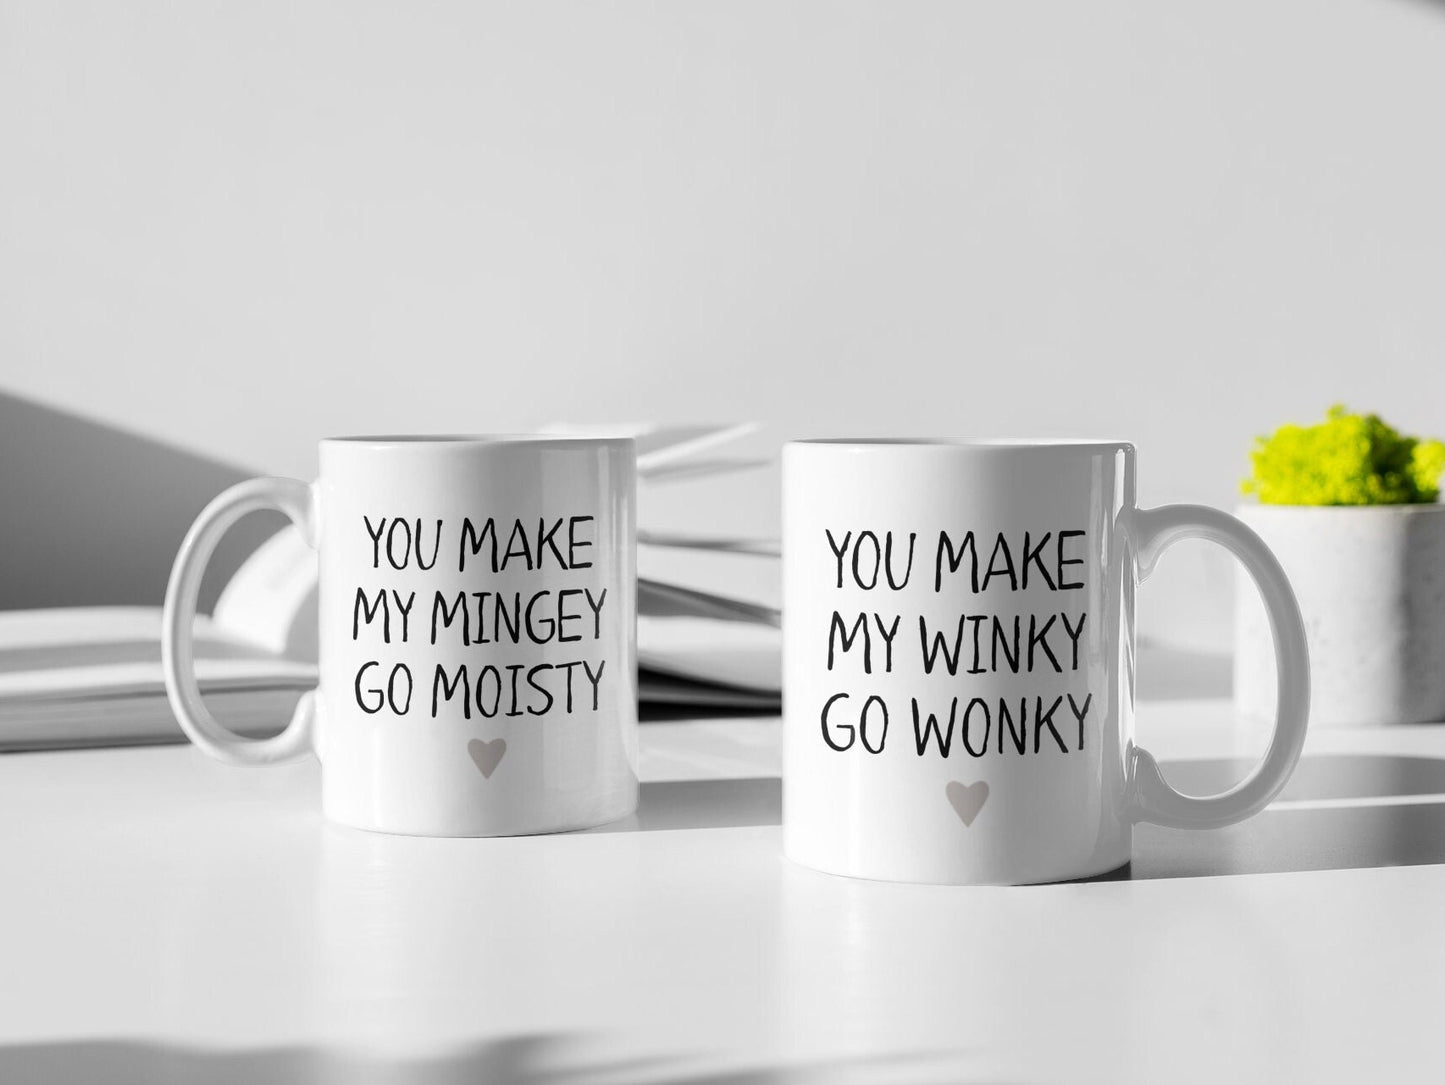 A pair of white ceramic mug featuring the funny quotes you make my mingey go moisty and you make my winky go wonky. Printed in black ink with a grey heart to the bottom centre of the design.